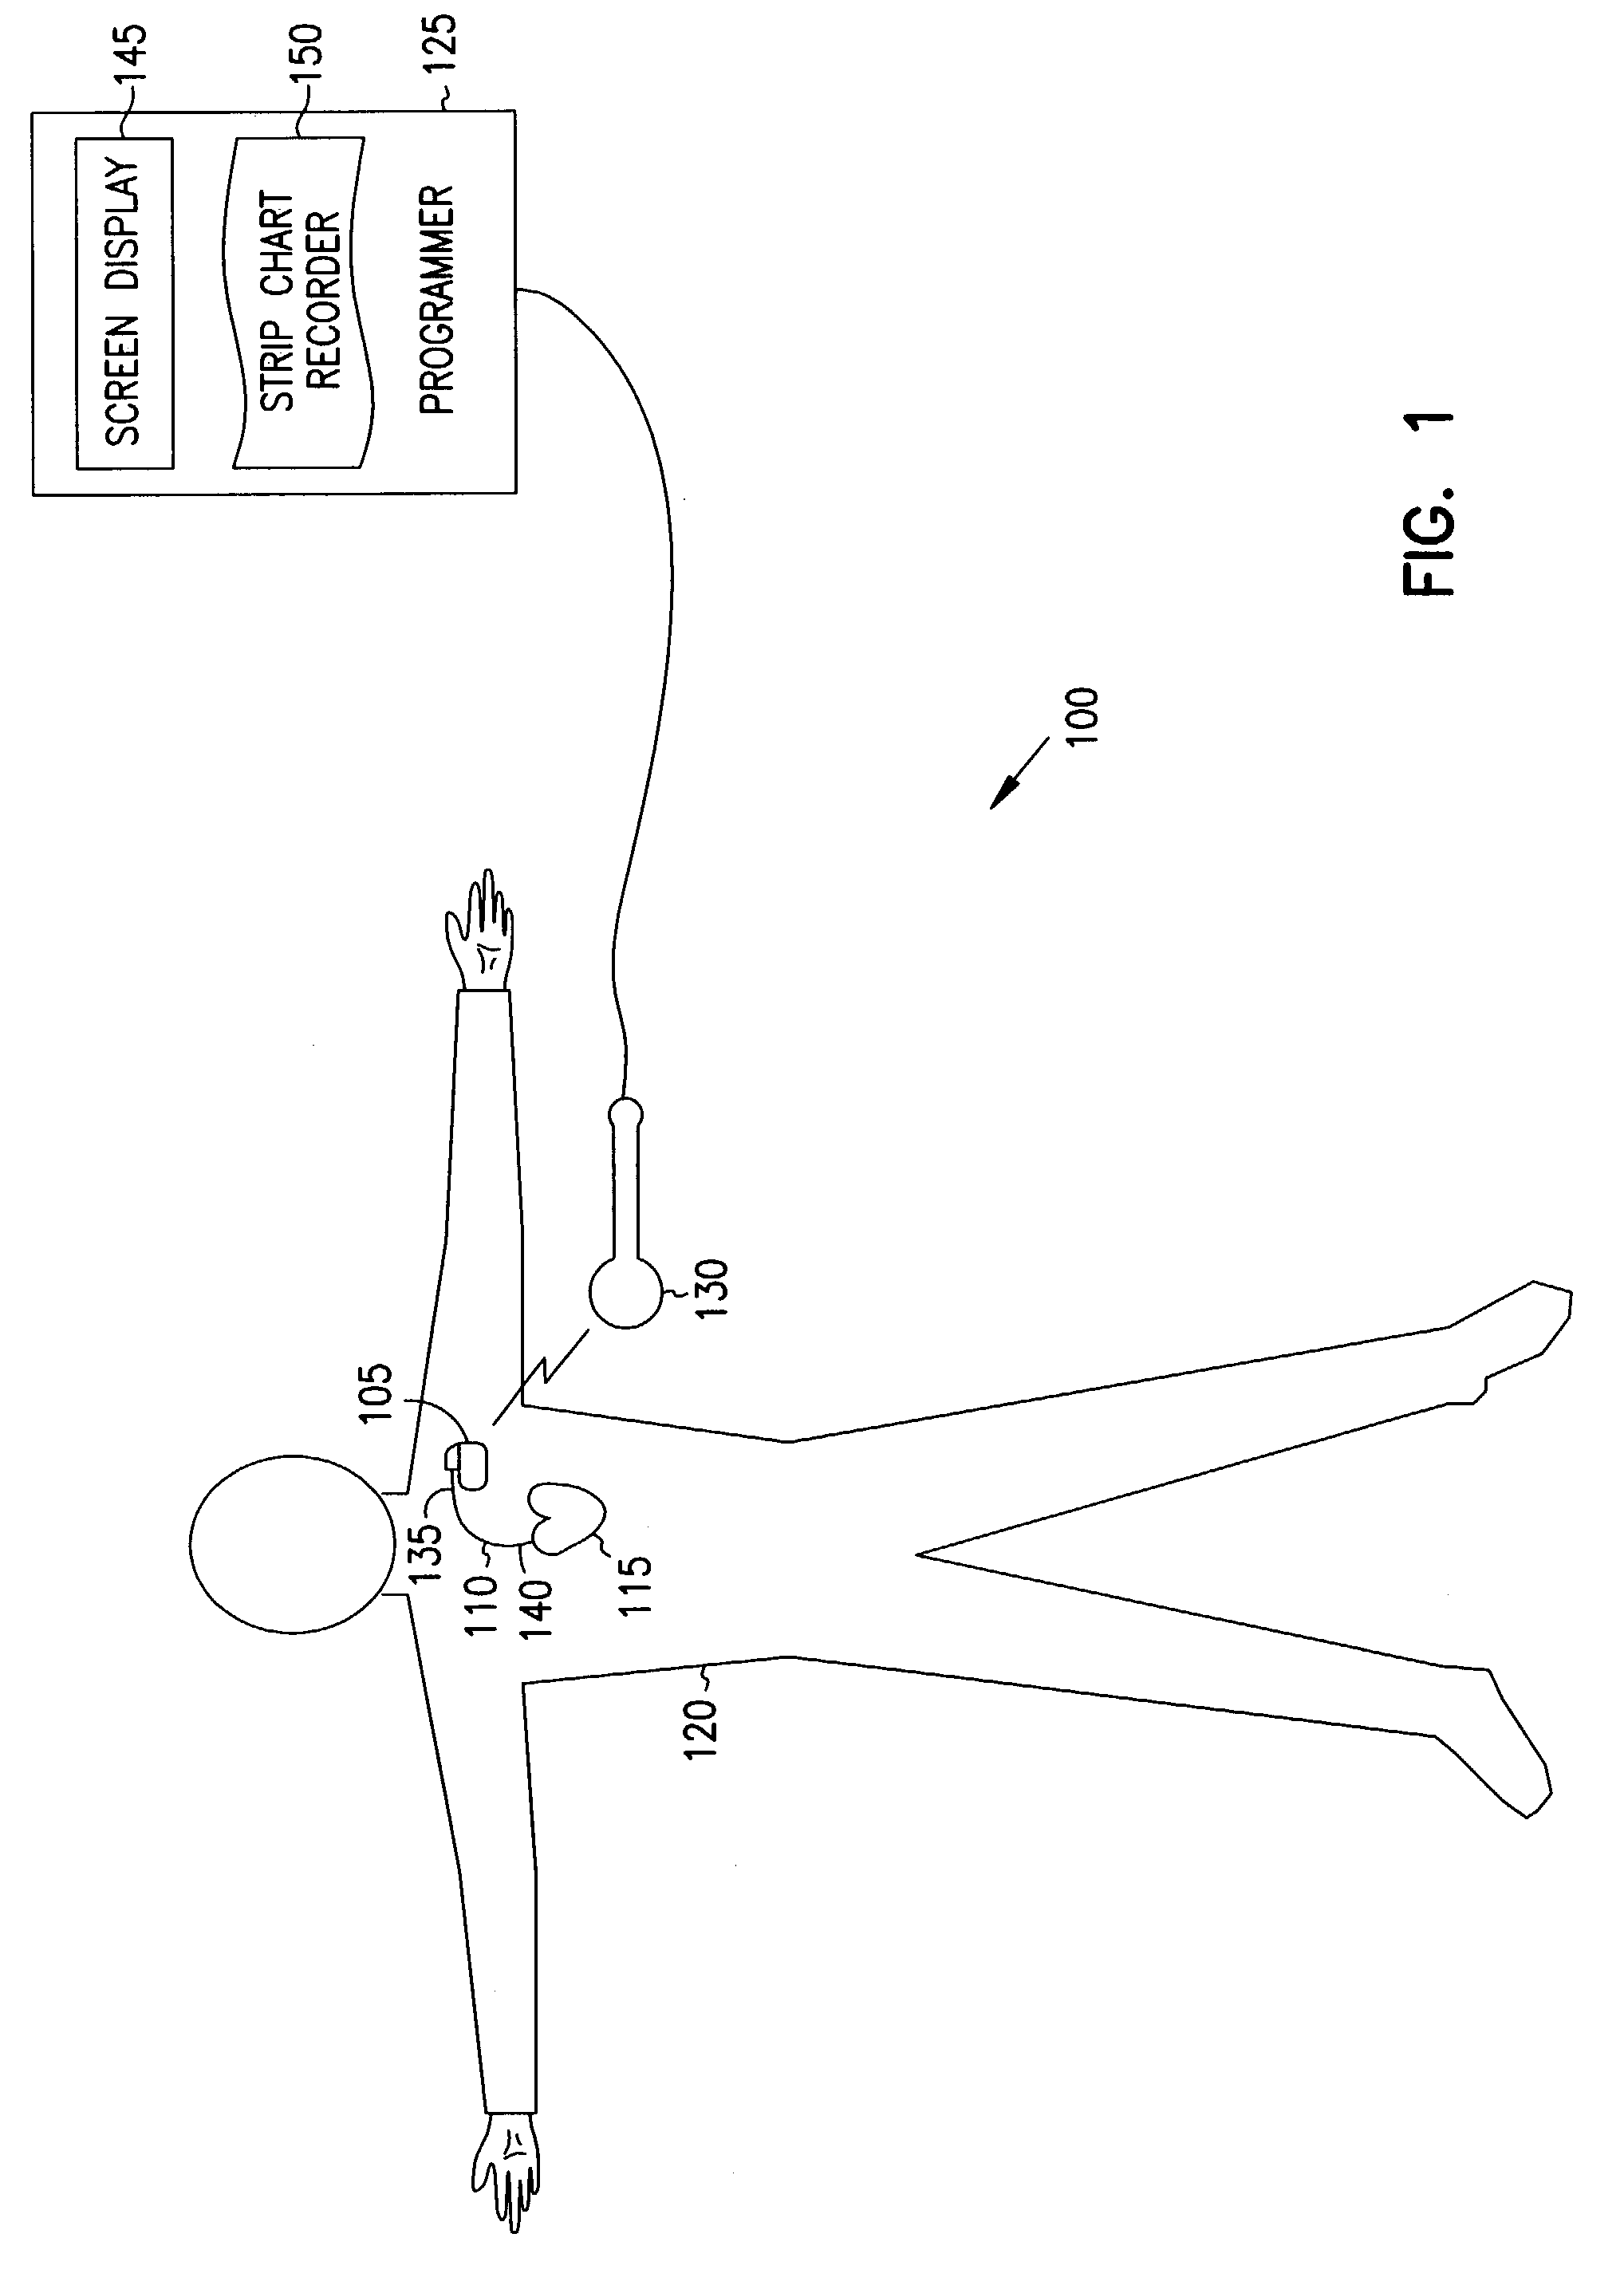 Event marker alignment by inclusion of event marker transmission latency in the real-time data stream